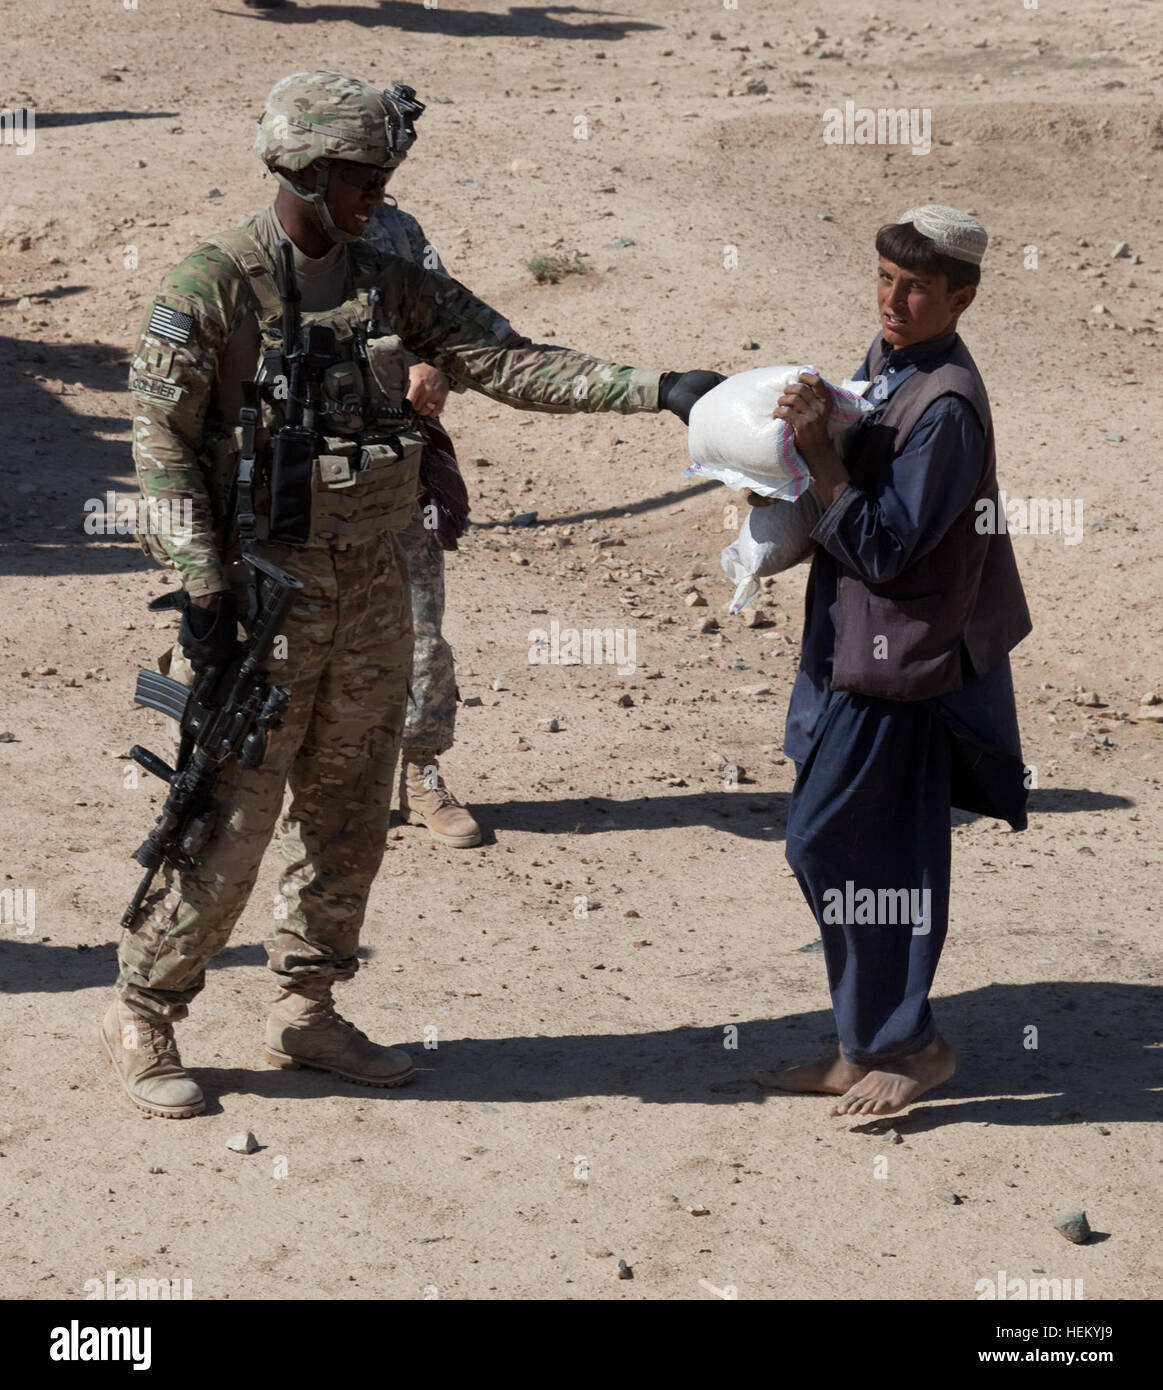 U.S. Army 1st Lt. John Collier, left, from 504th Battlefield Surveillance  Brigade, hands out food to an Afghan boy in Ulagay, Kandahar province,  Afghanistan, Oct. 19, 2011. Soldiers of 504th Battlefield Surveillance